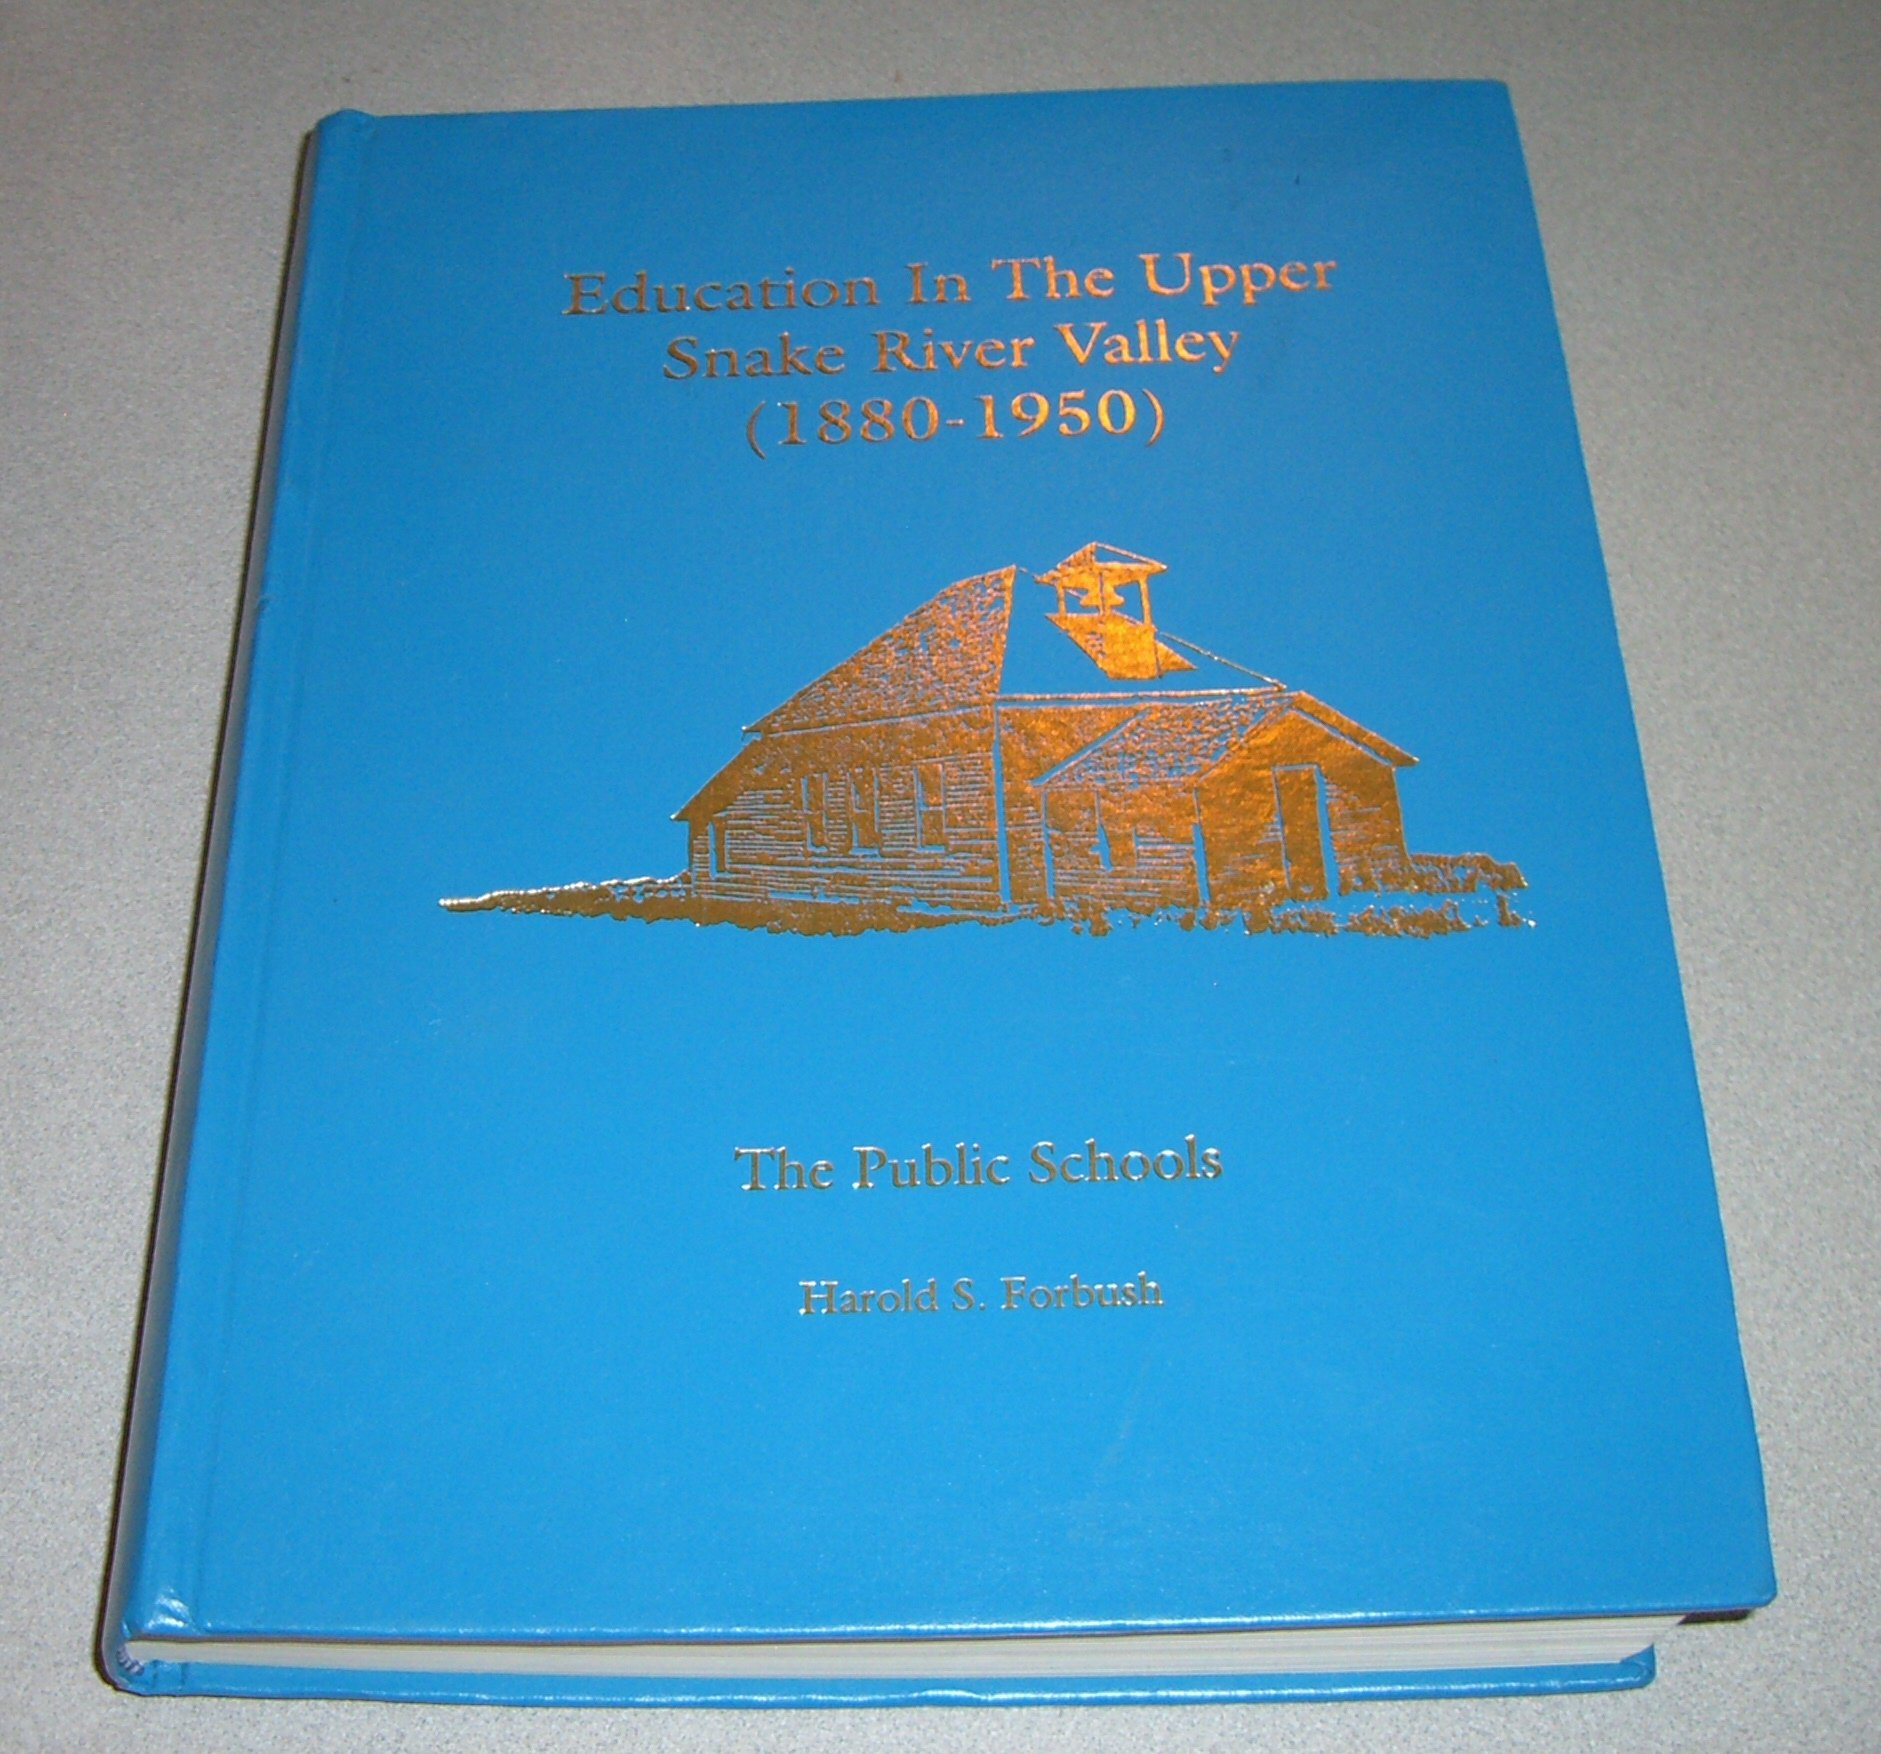 Education in the Upper Snake River Valley: The public schools (1880-1950) (book cover)